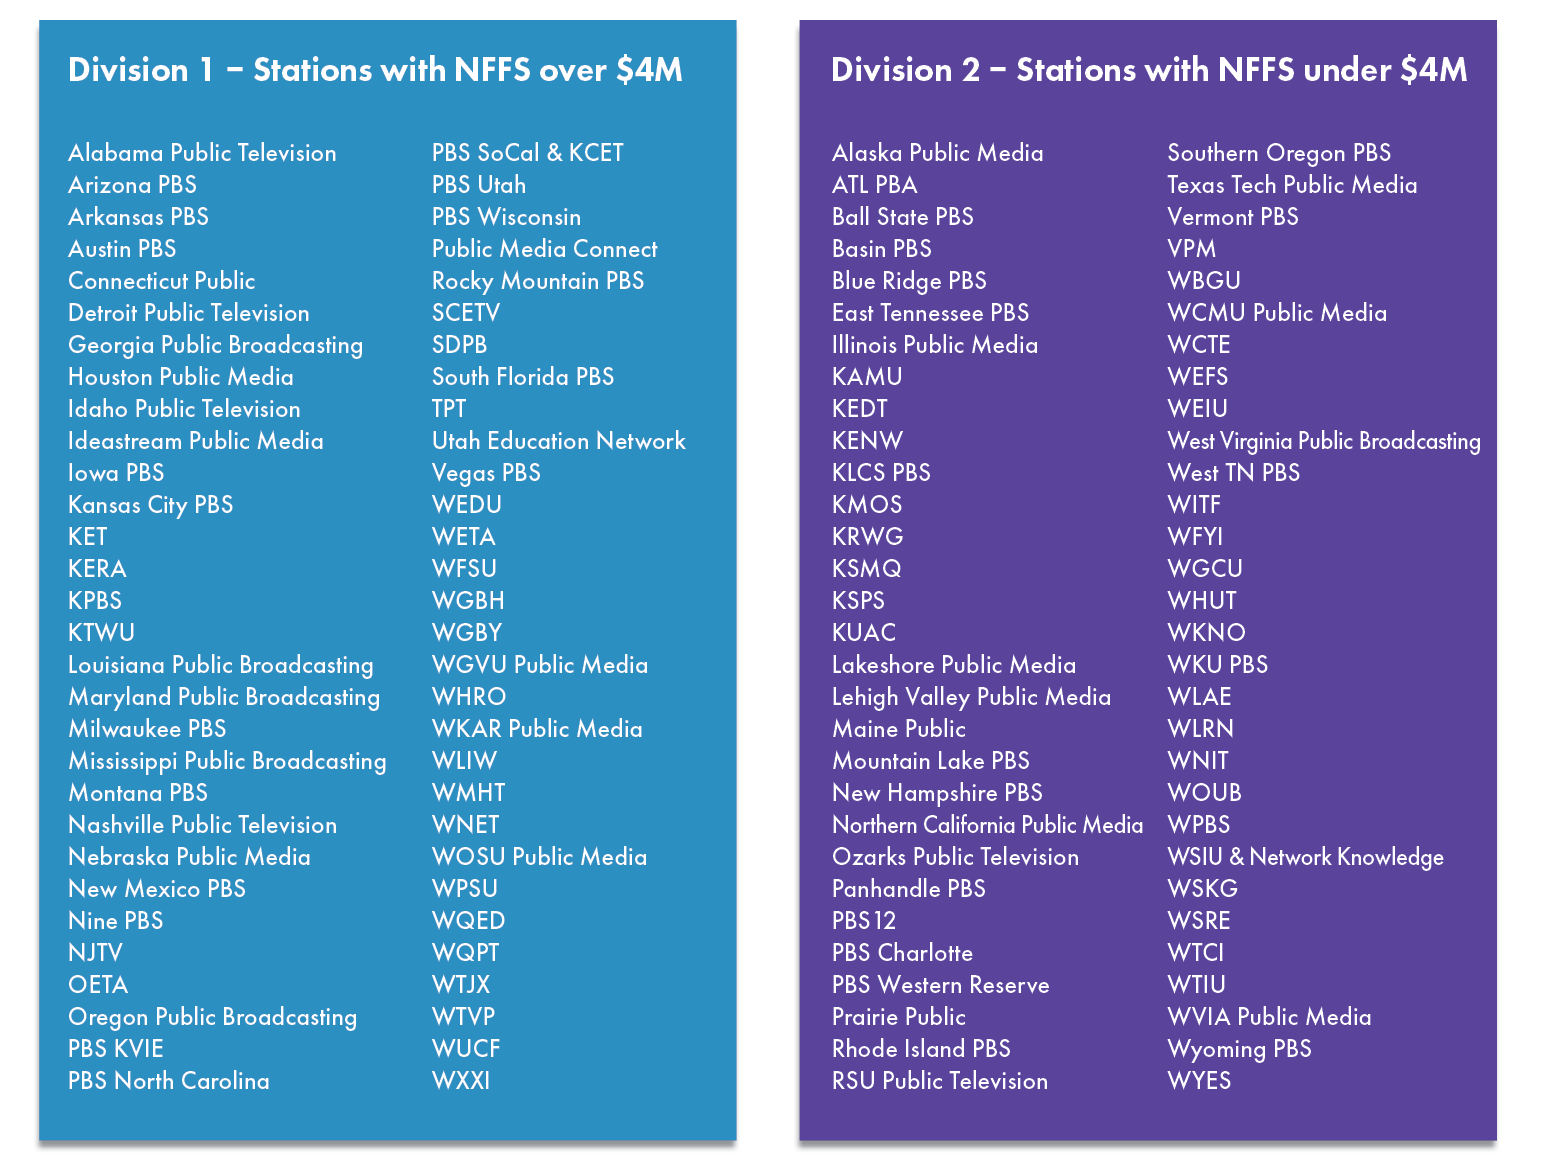 Station divisions